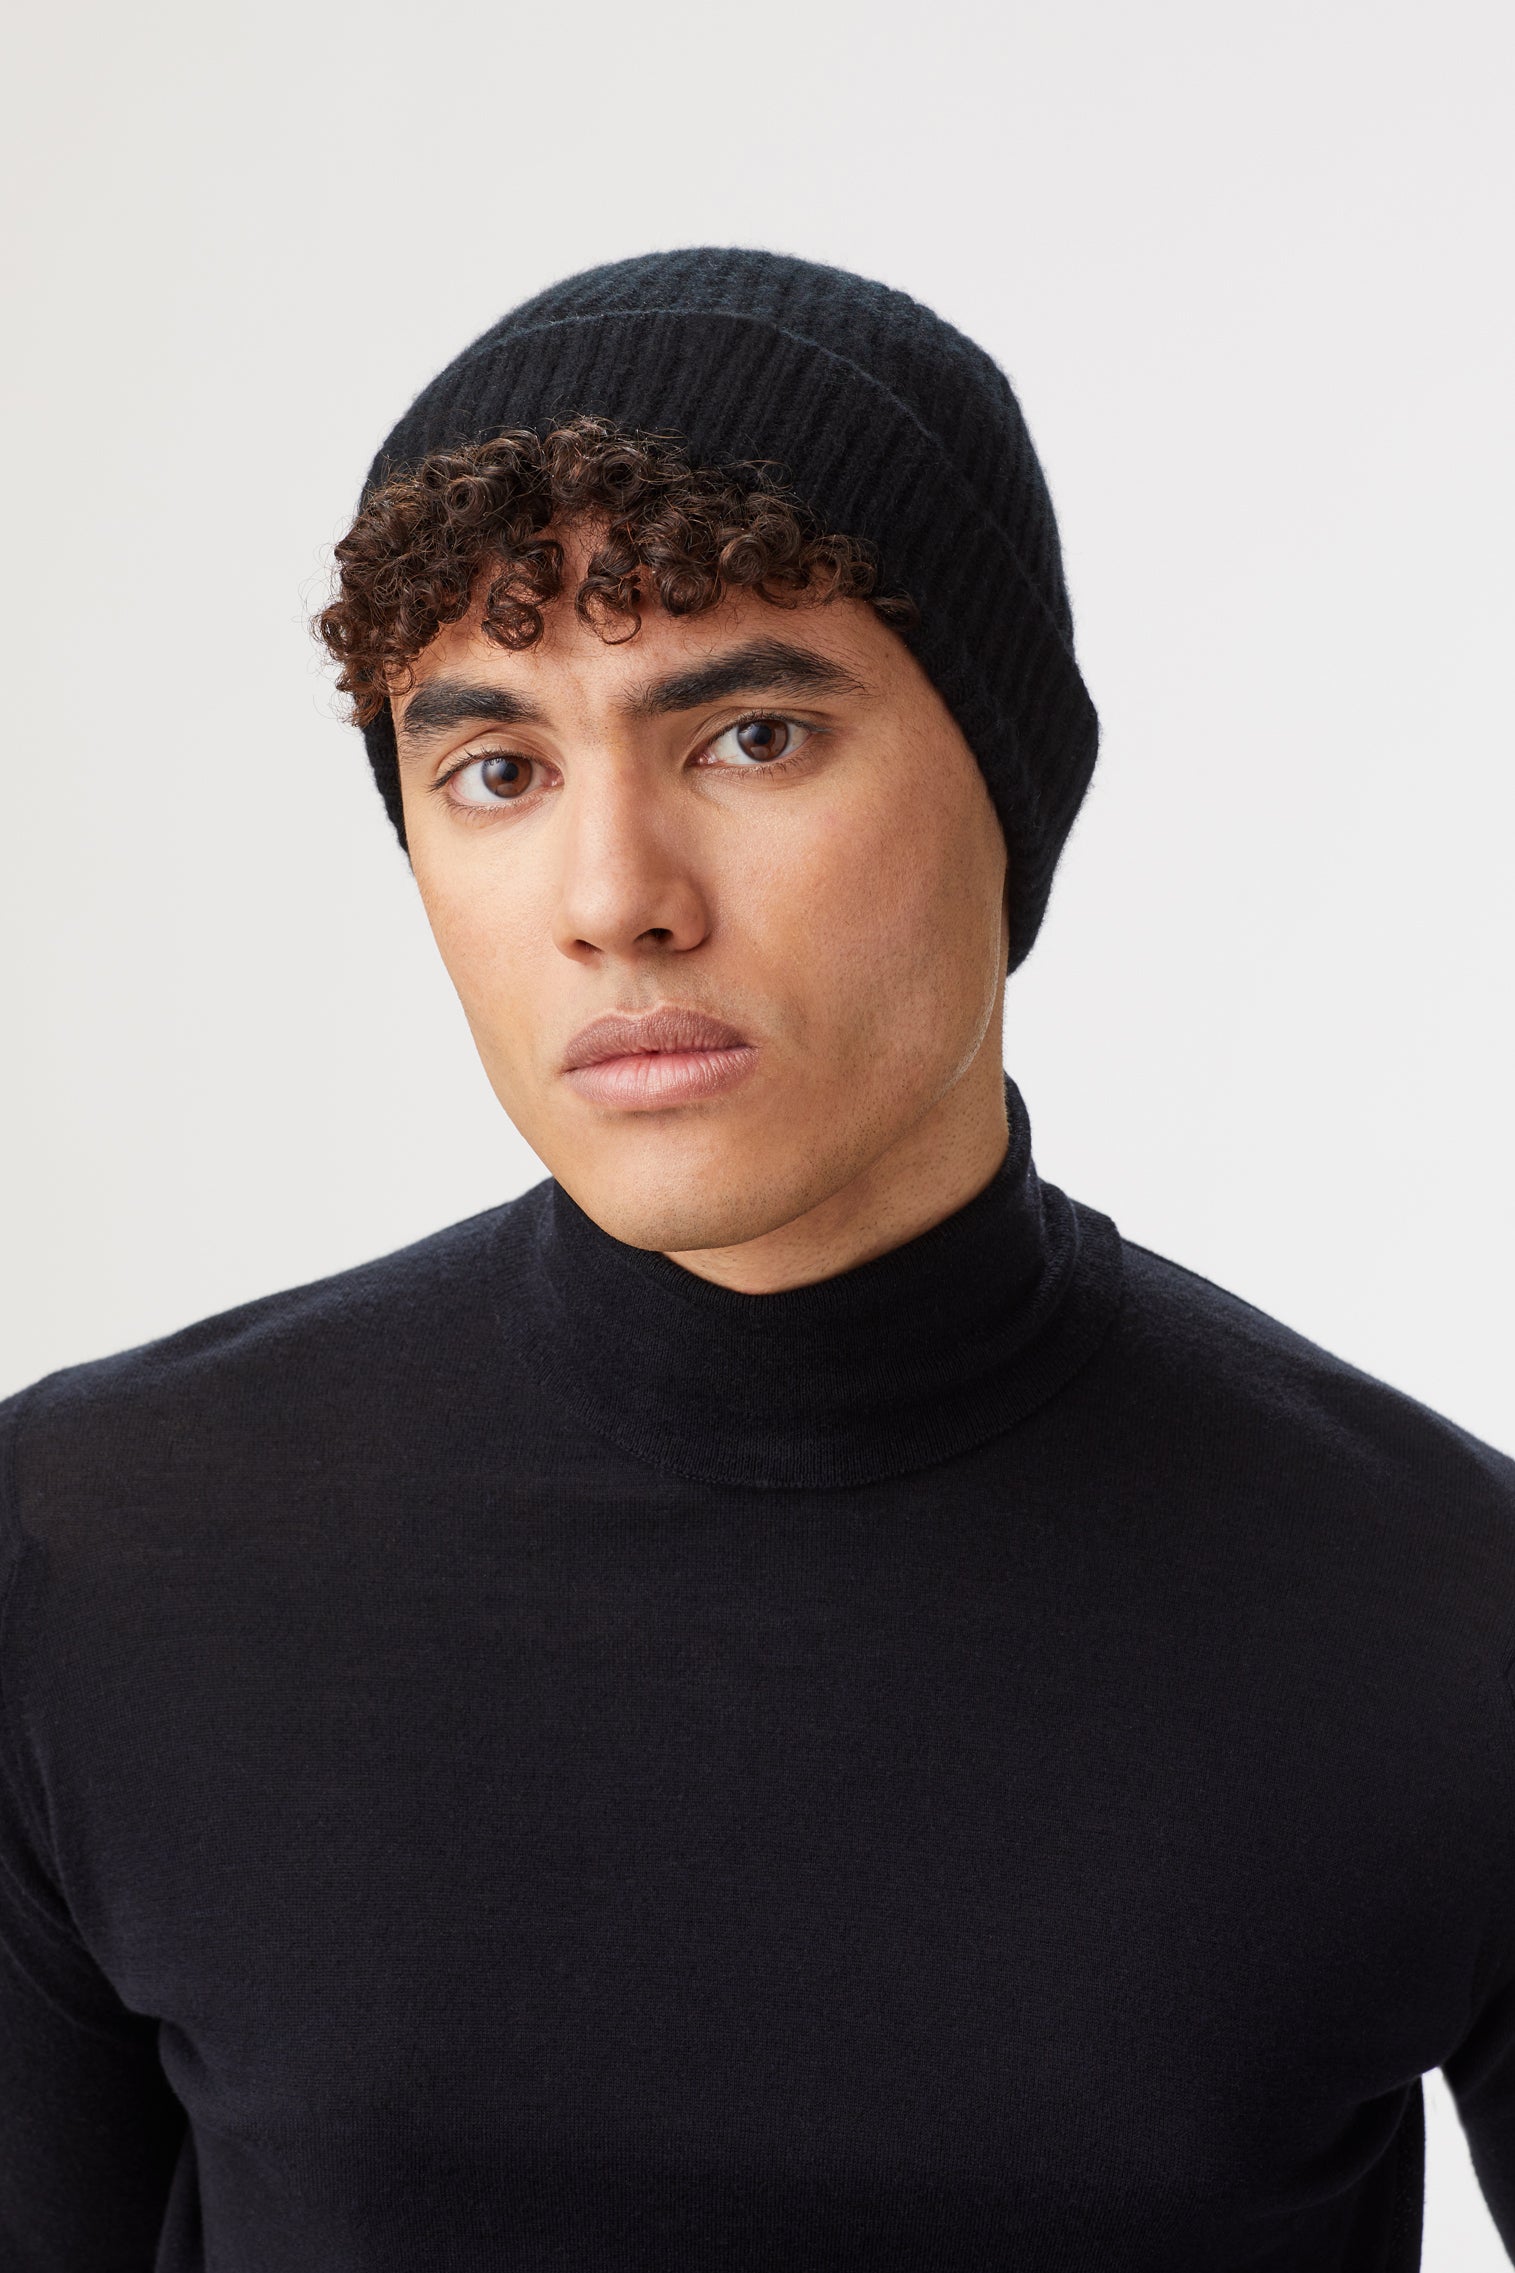 Black Cashmere Ski Beanie - Hats for Oval Face Shapes - Lock & Co. Hatters London UK